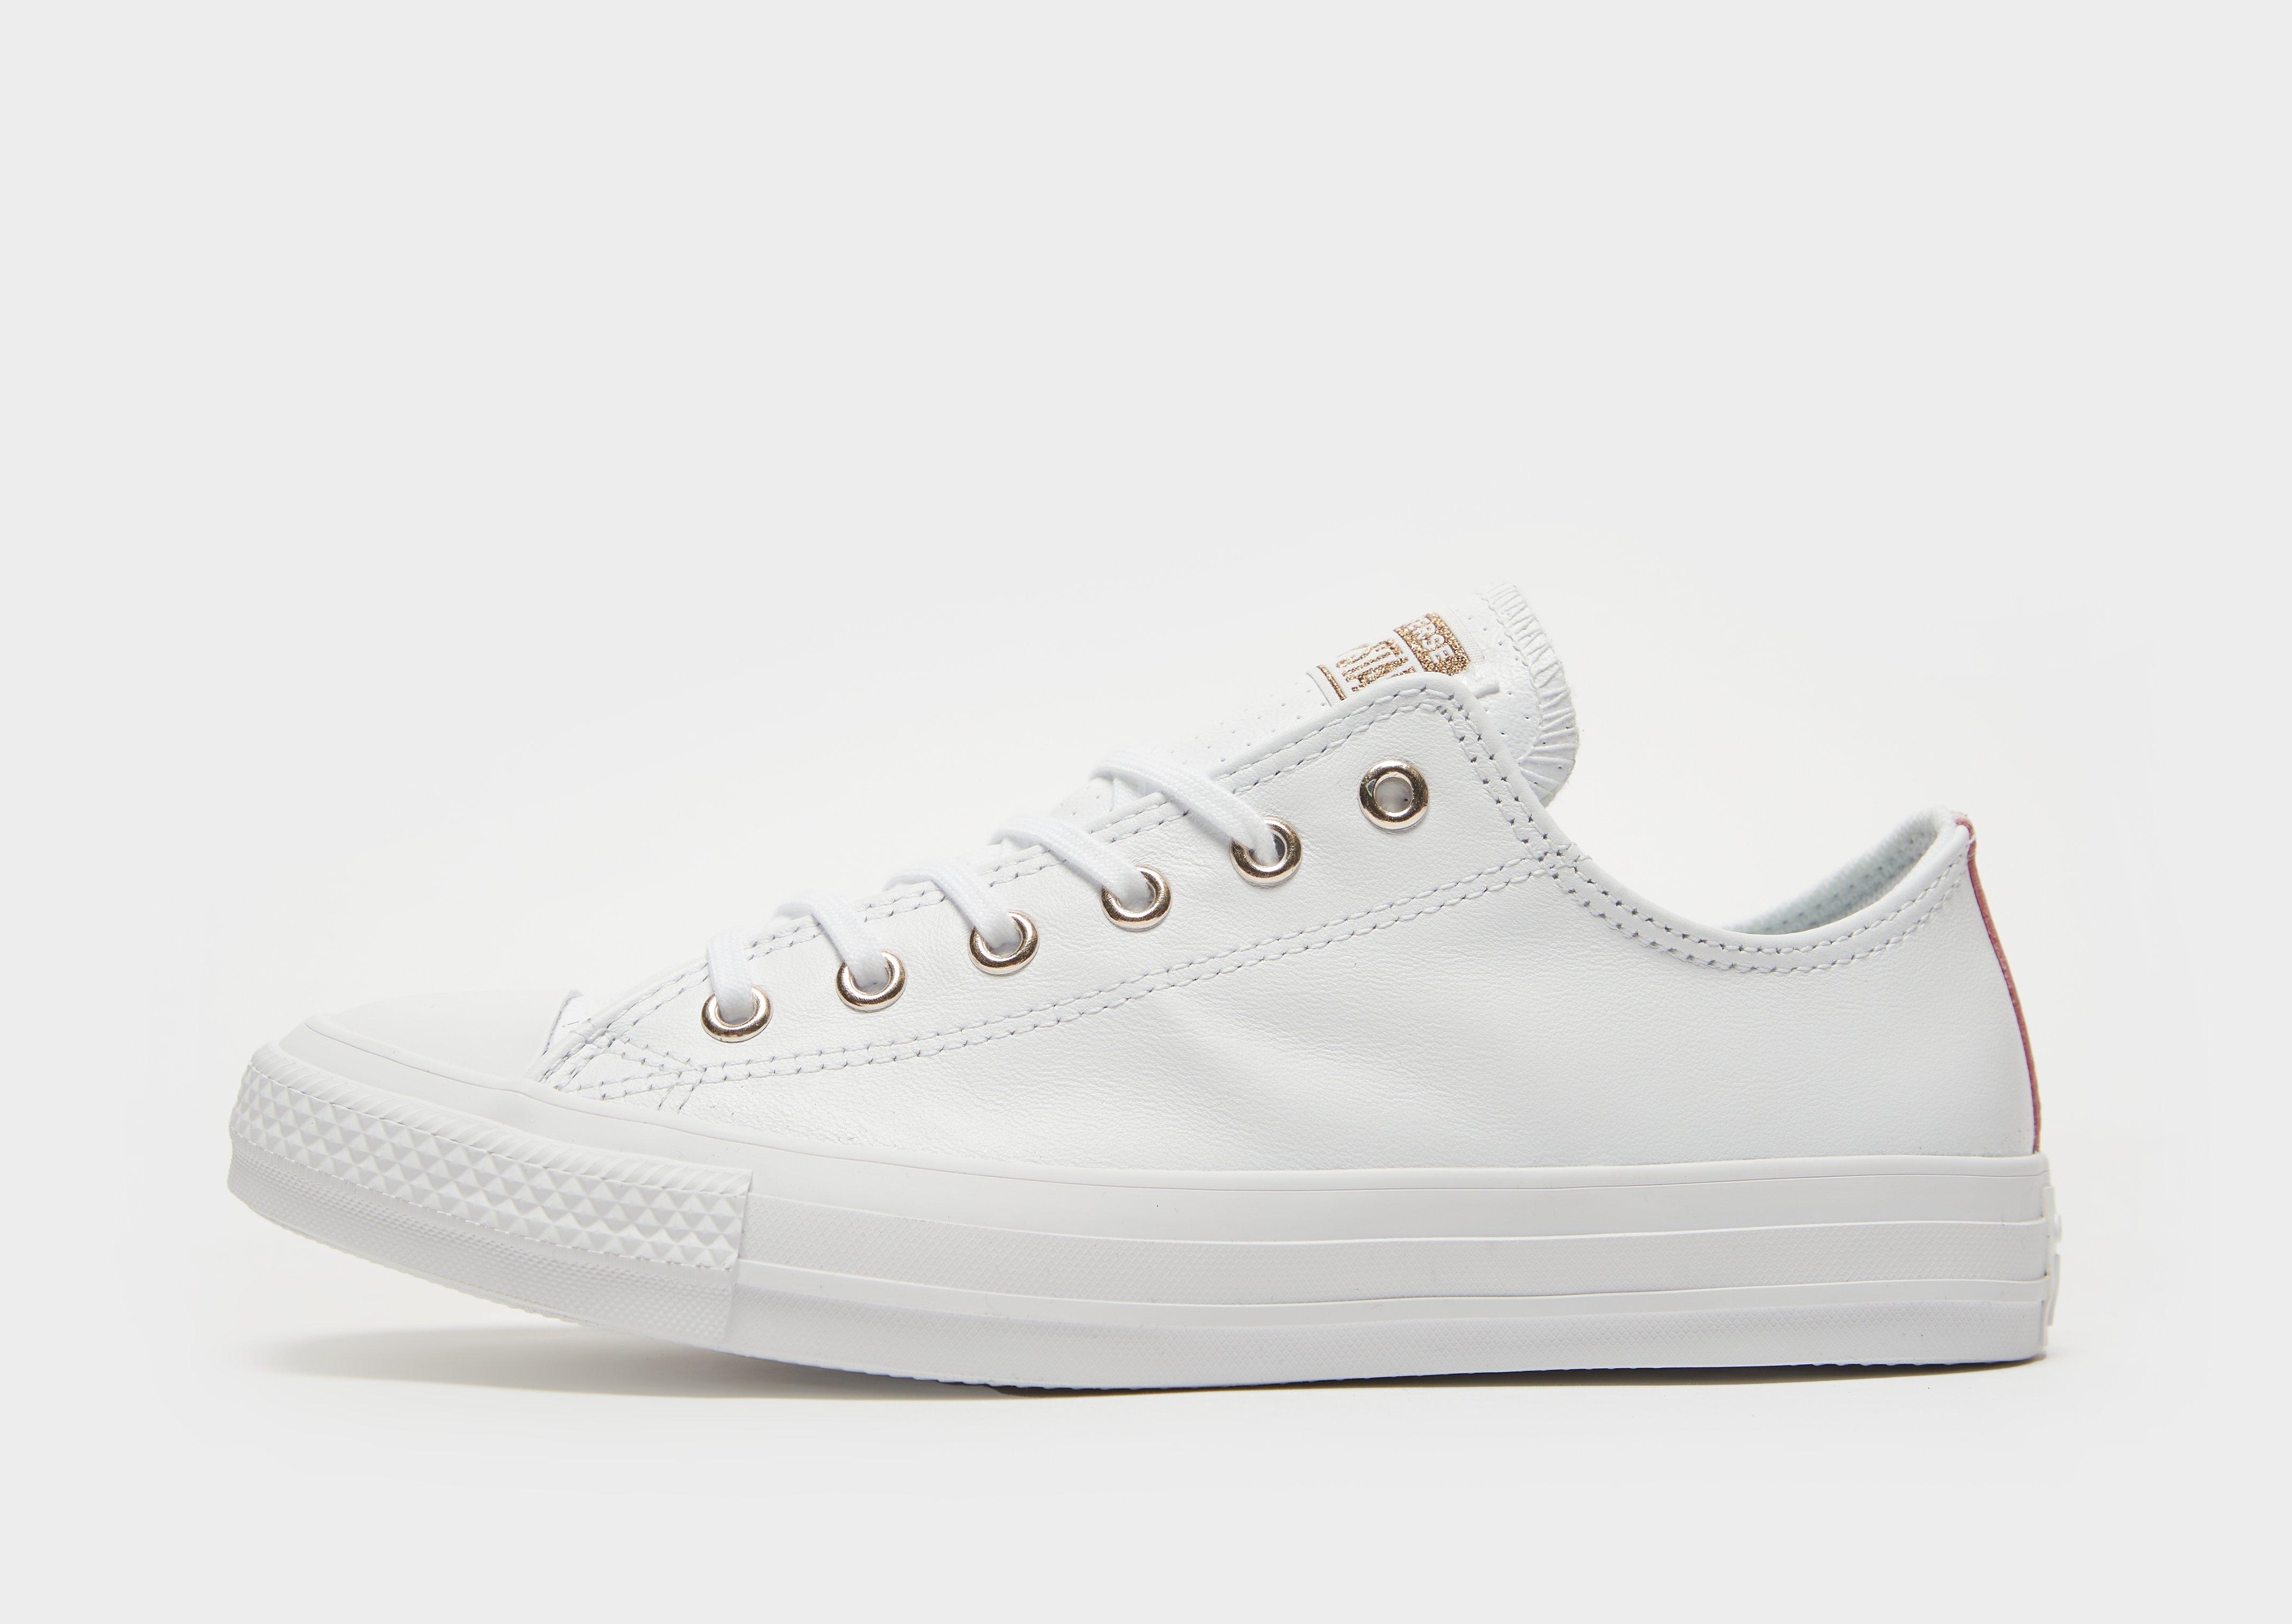 Sociale Studier assistent Thanksgiving White Converse All Star Oxford Junior | JD Sports Global - JD Sports Global